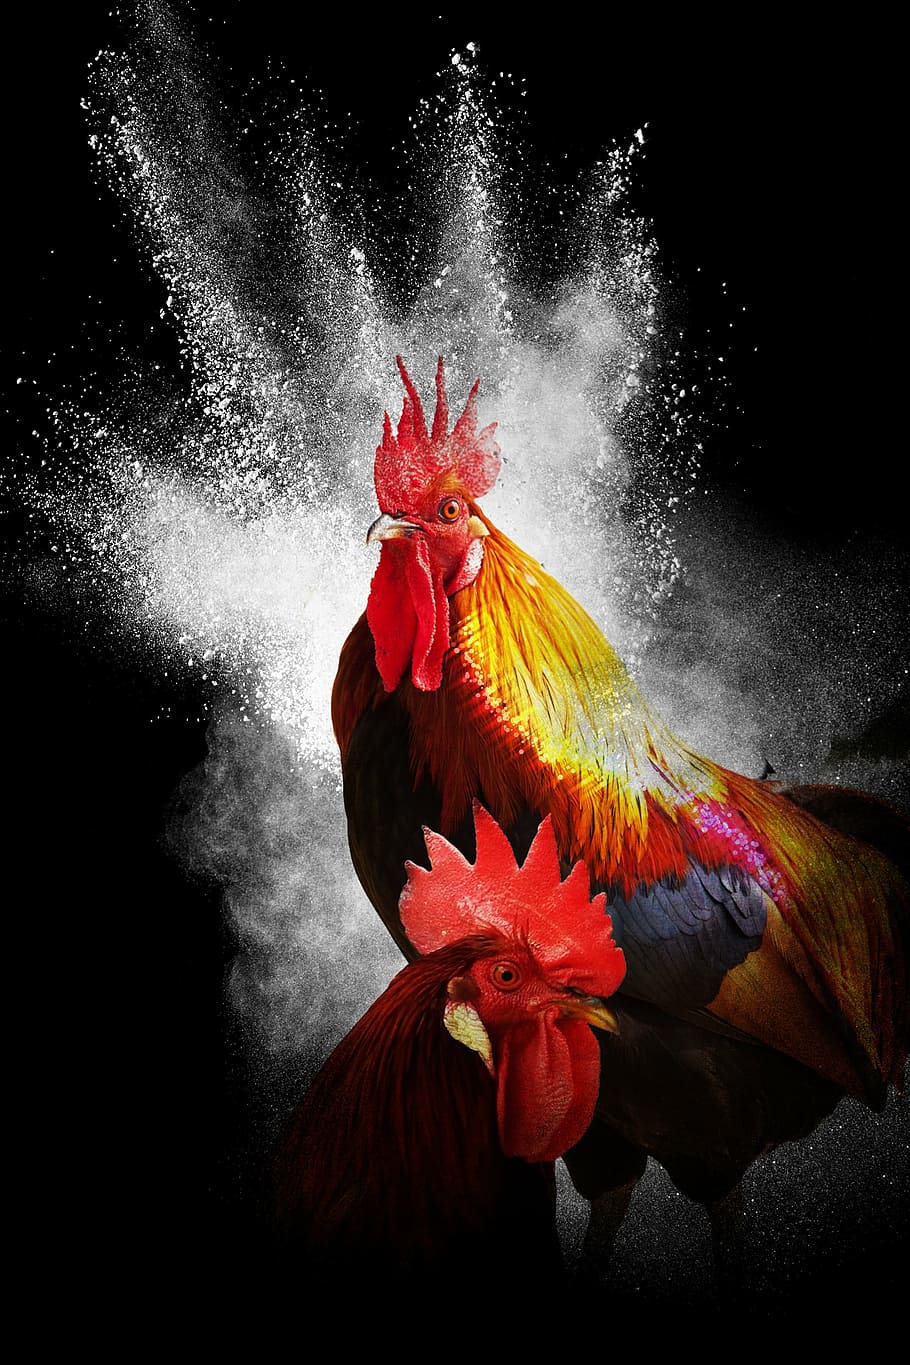 two, orange, red, gamefowl roosters, cock, year of the rooster, black background, collage, photoshop, bird